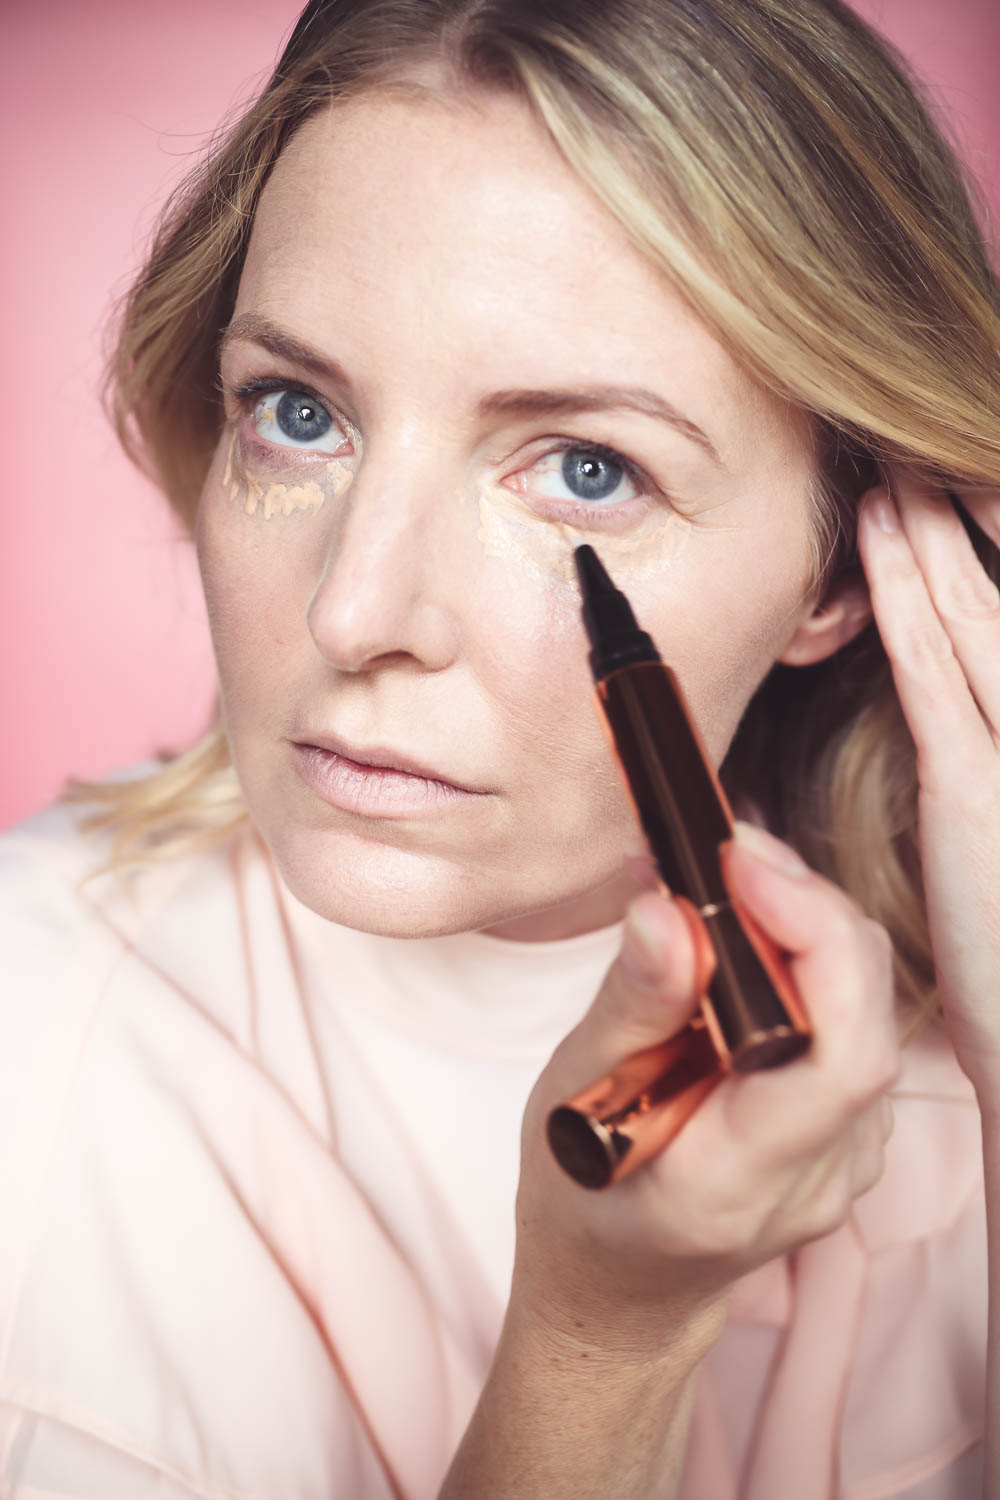 How To Apply Under Eye Concealer On Mature Skin